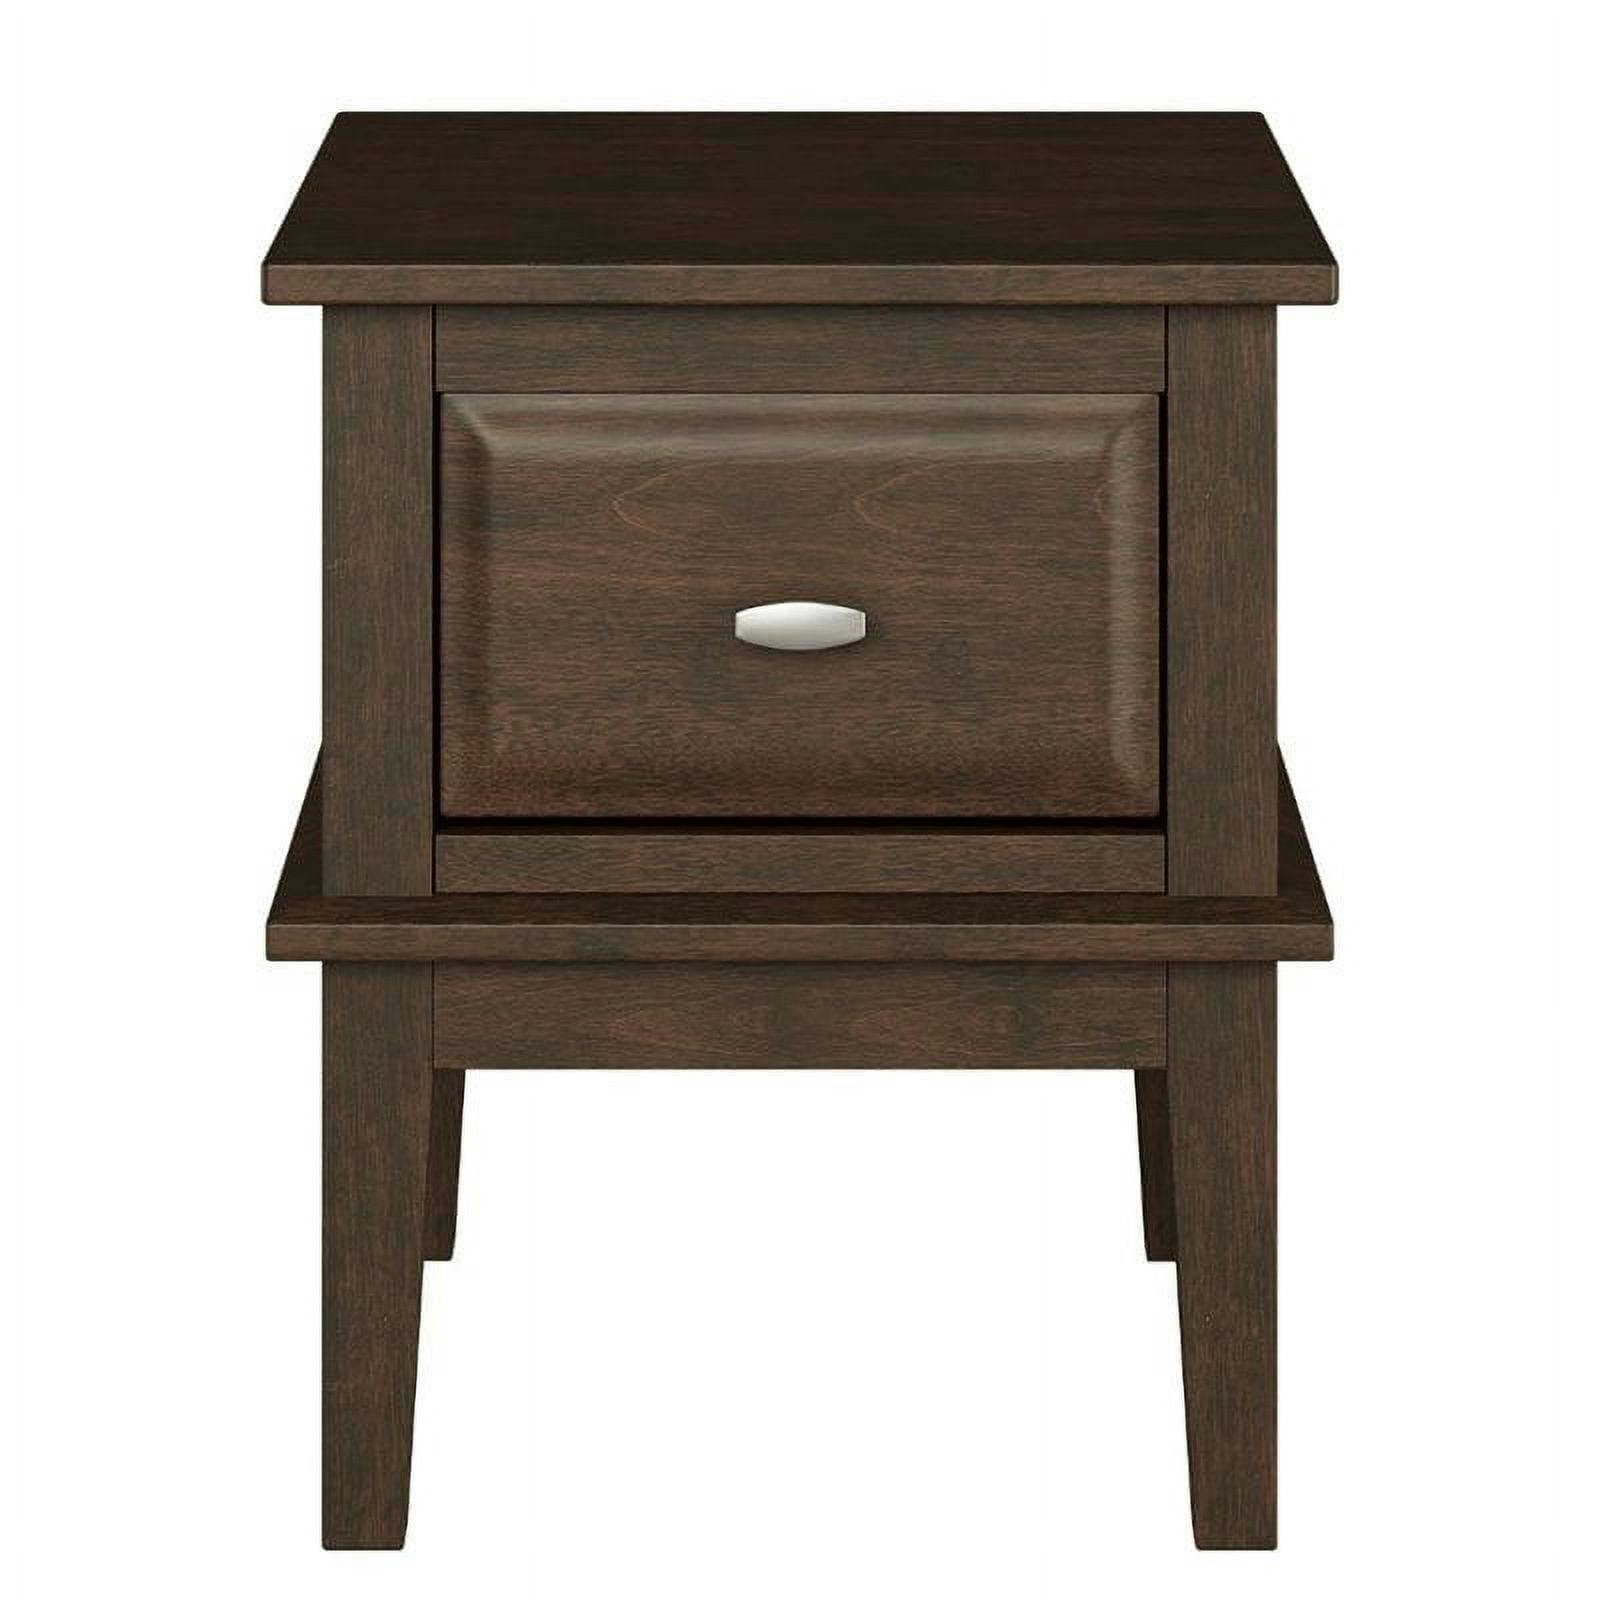 Transitional Birch Veneer Round End Table with Storage in Cherry